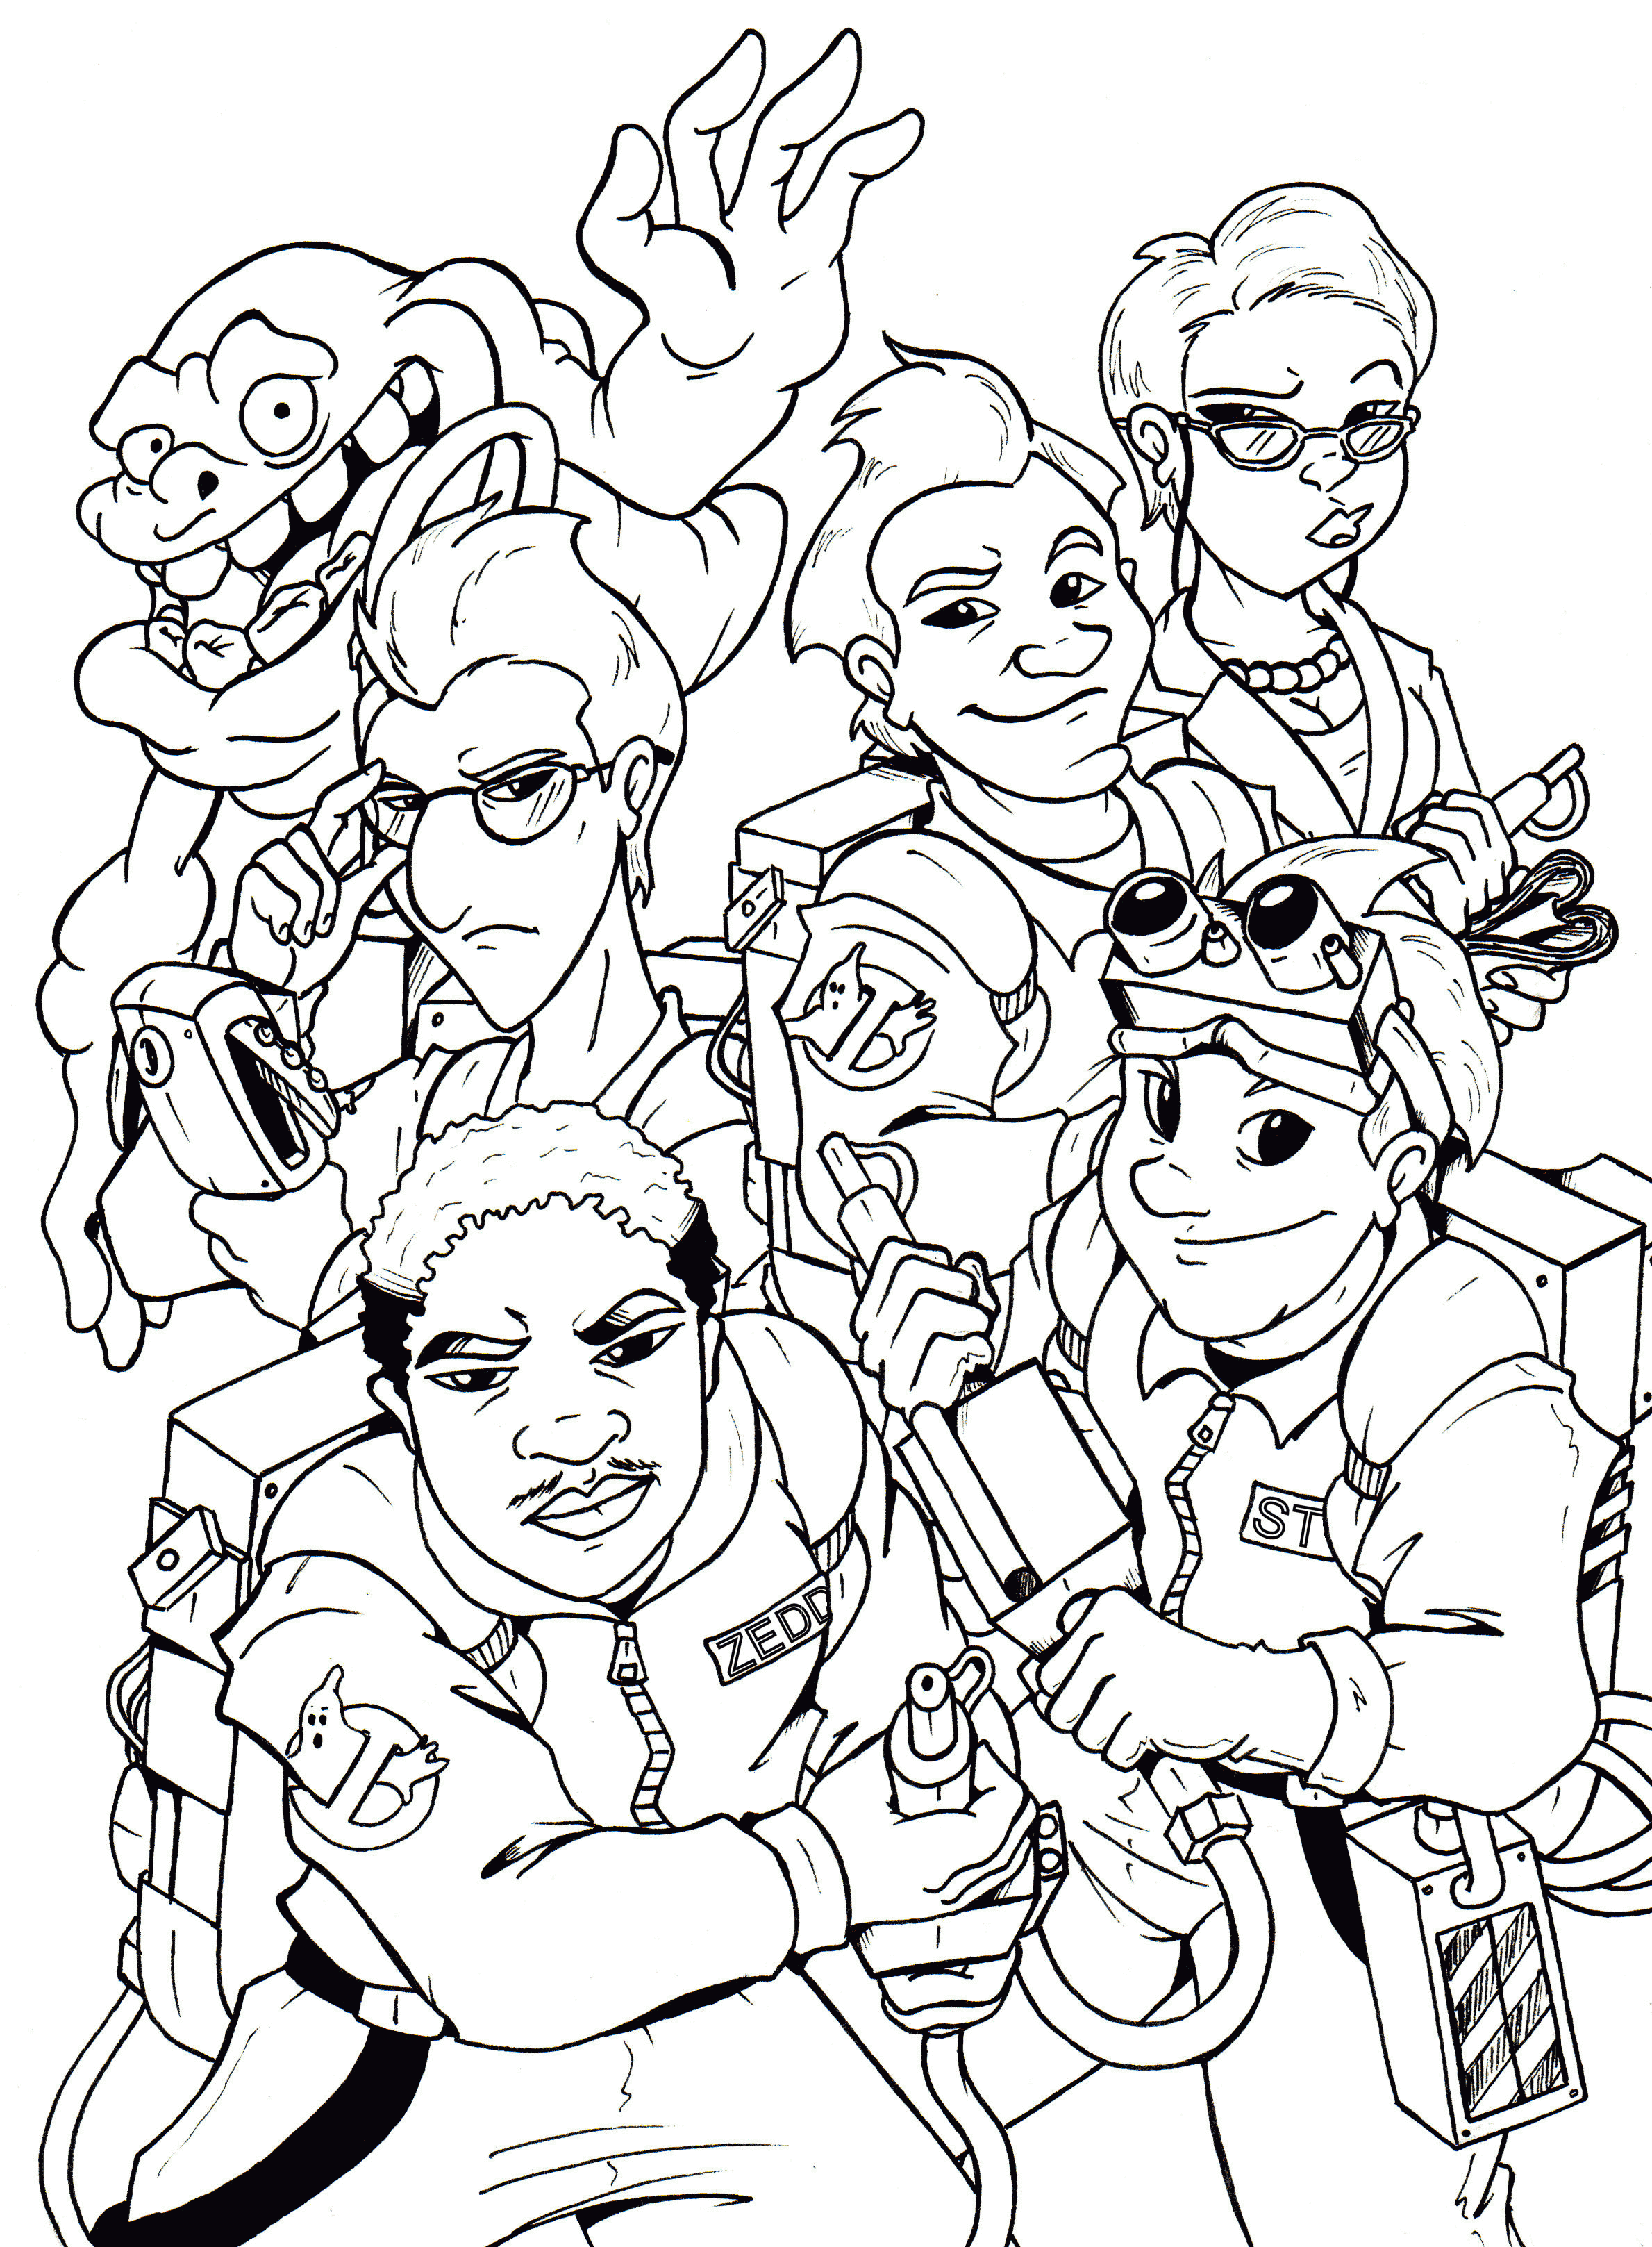 Related Ghostbusters Coloring Pages item-3875, Ghostbusters ...